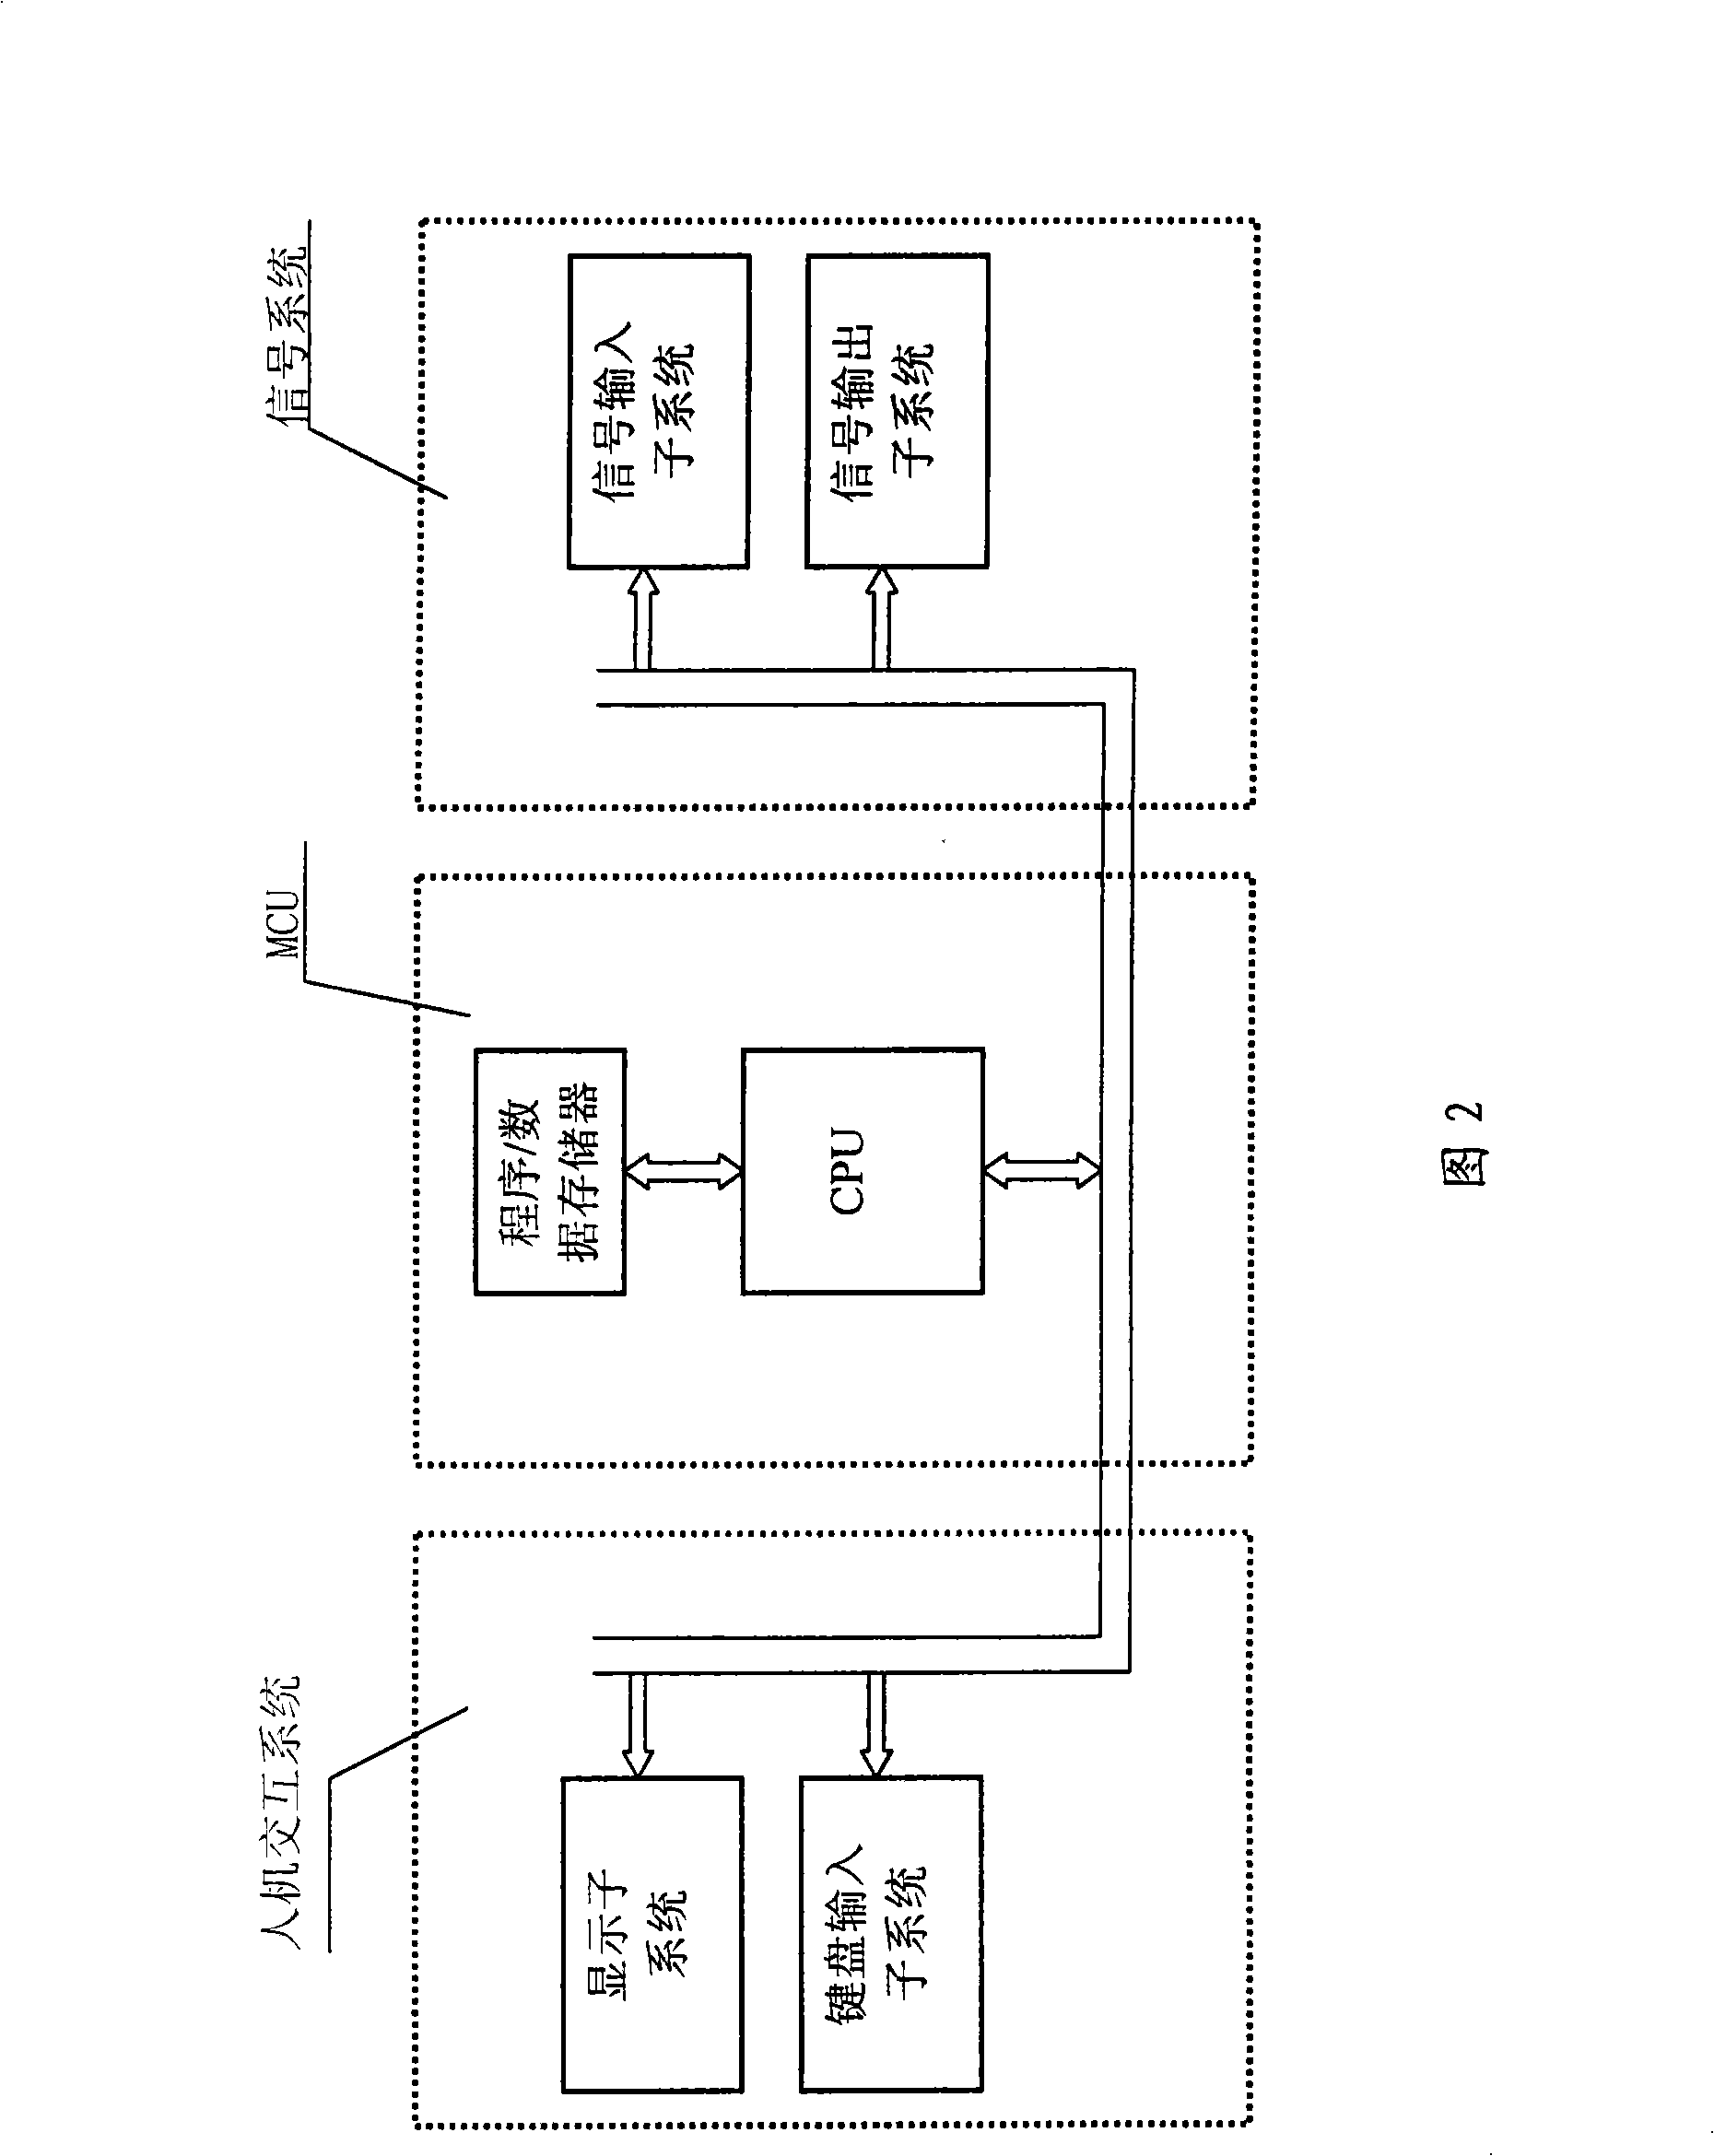 Fuzzy intelligent control system for casting water processing medicament